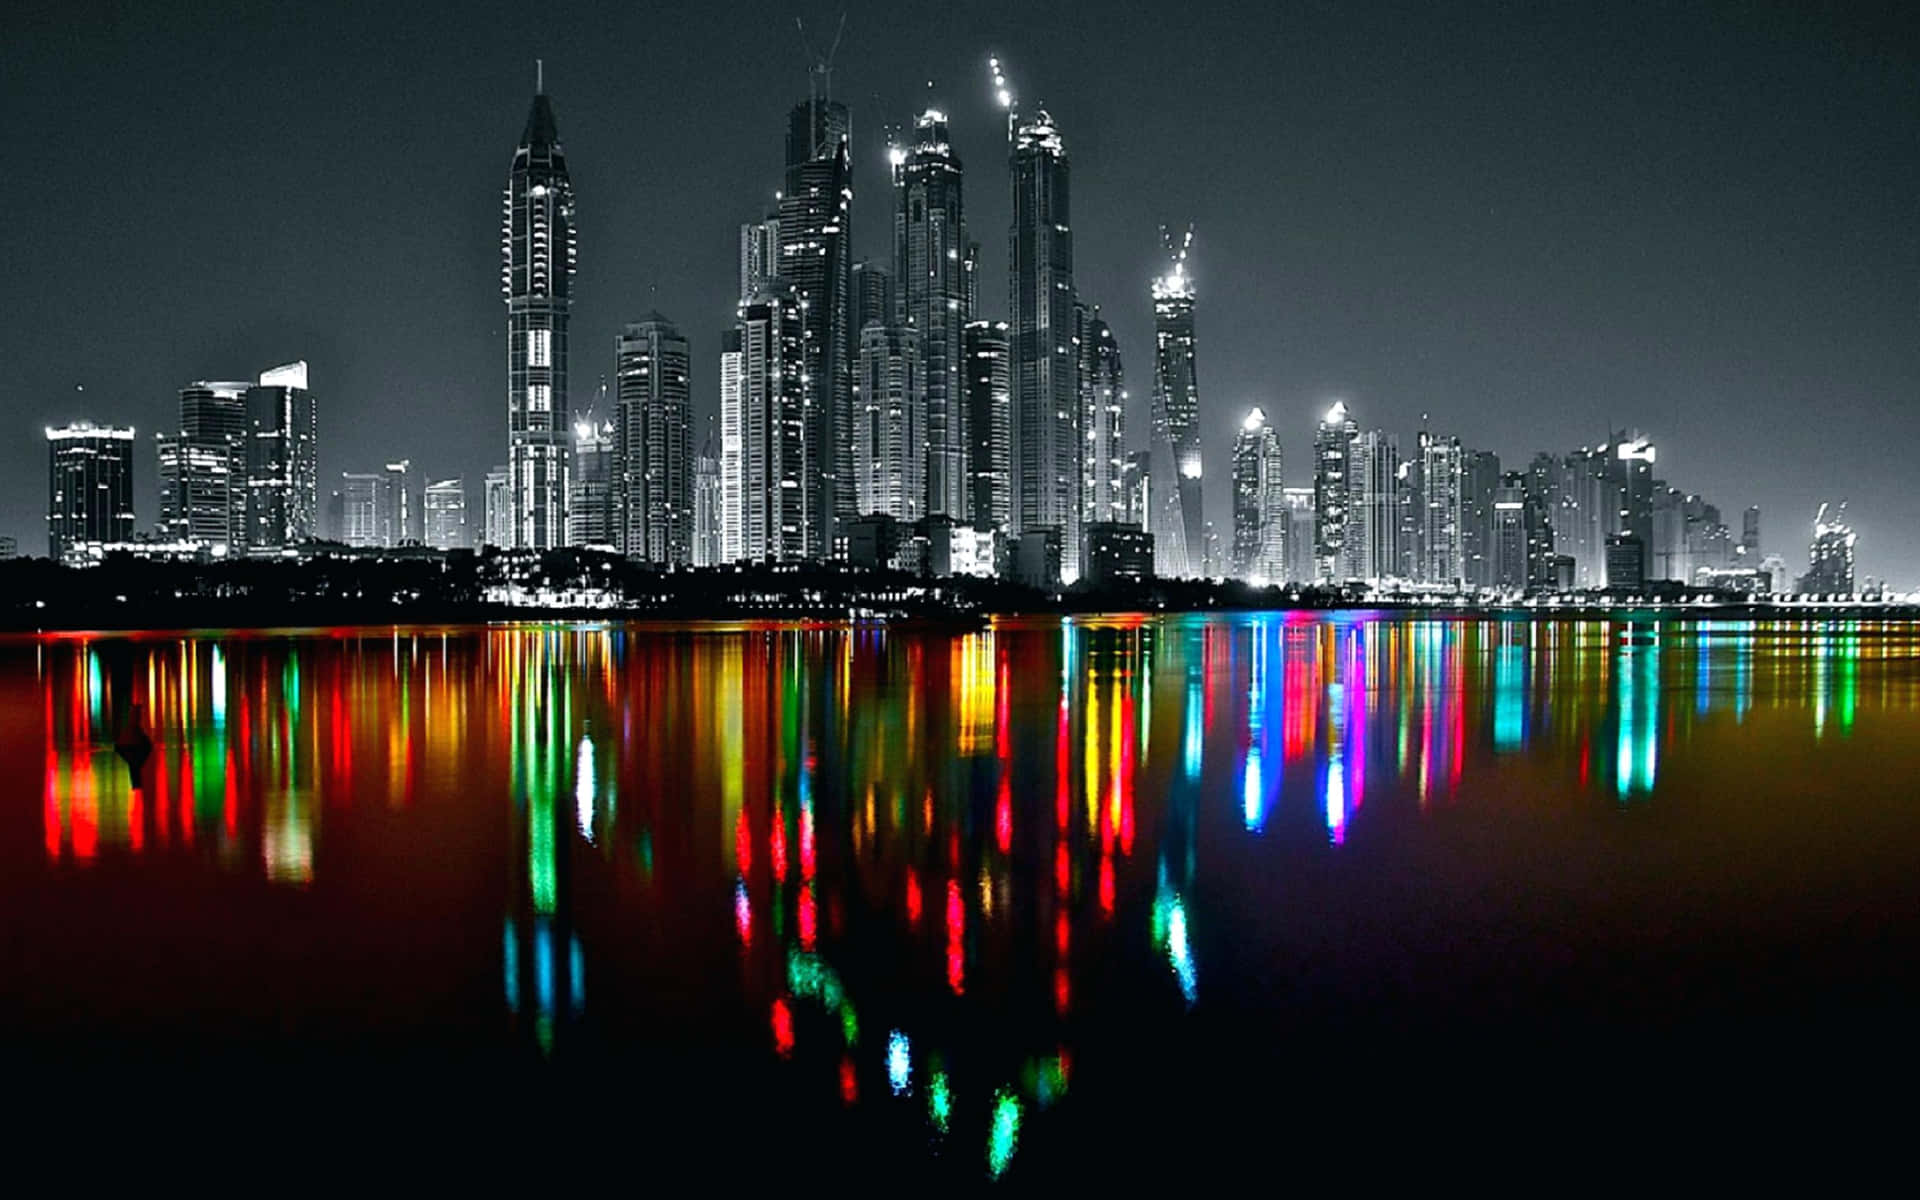 Monochrome Cityscapewith Colorful Reflections Wallpaper